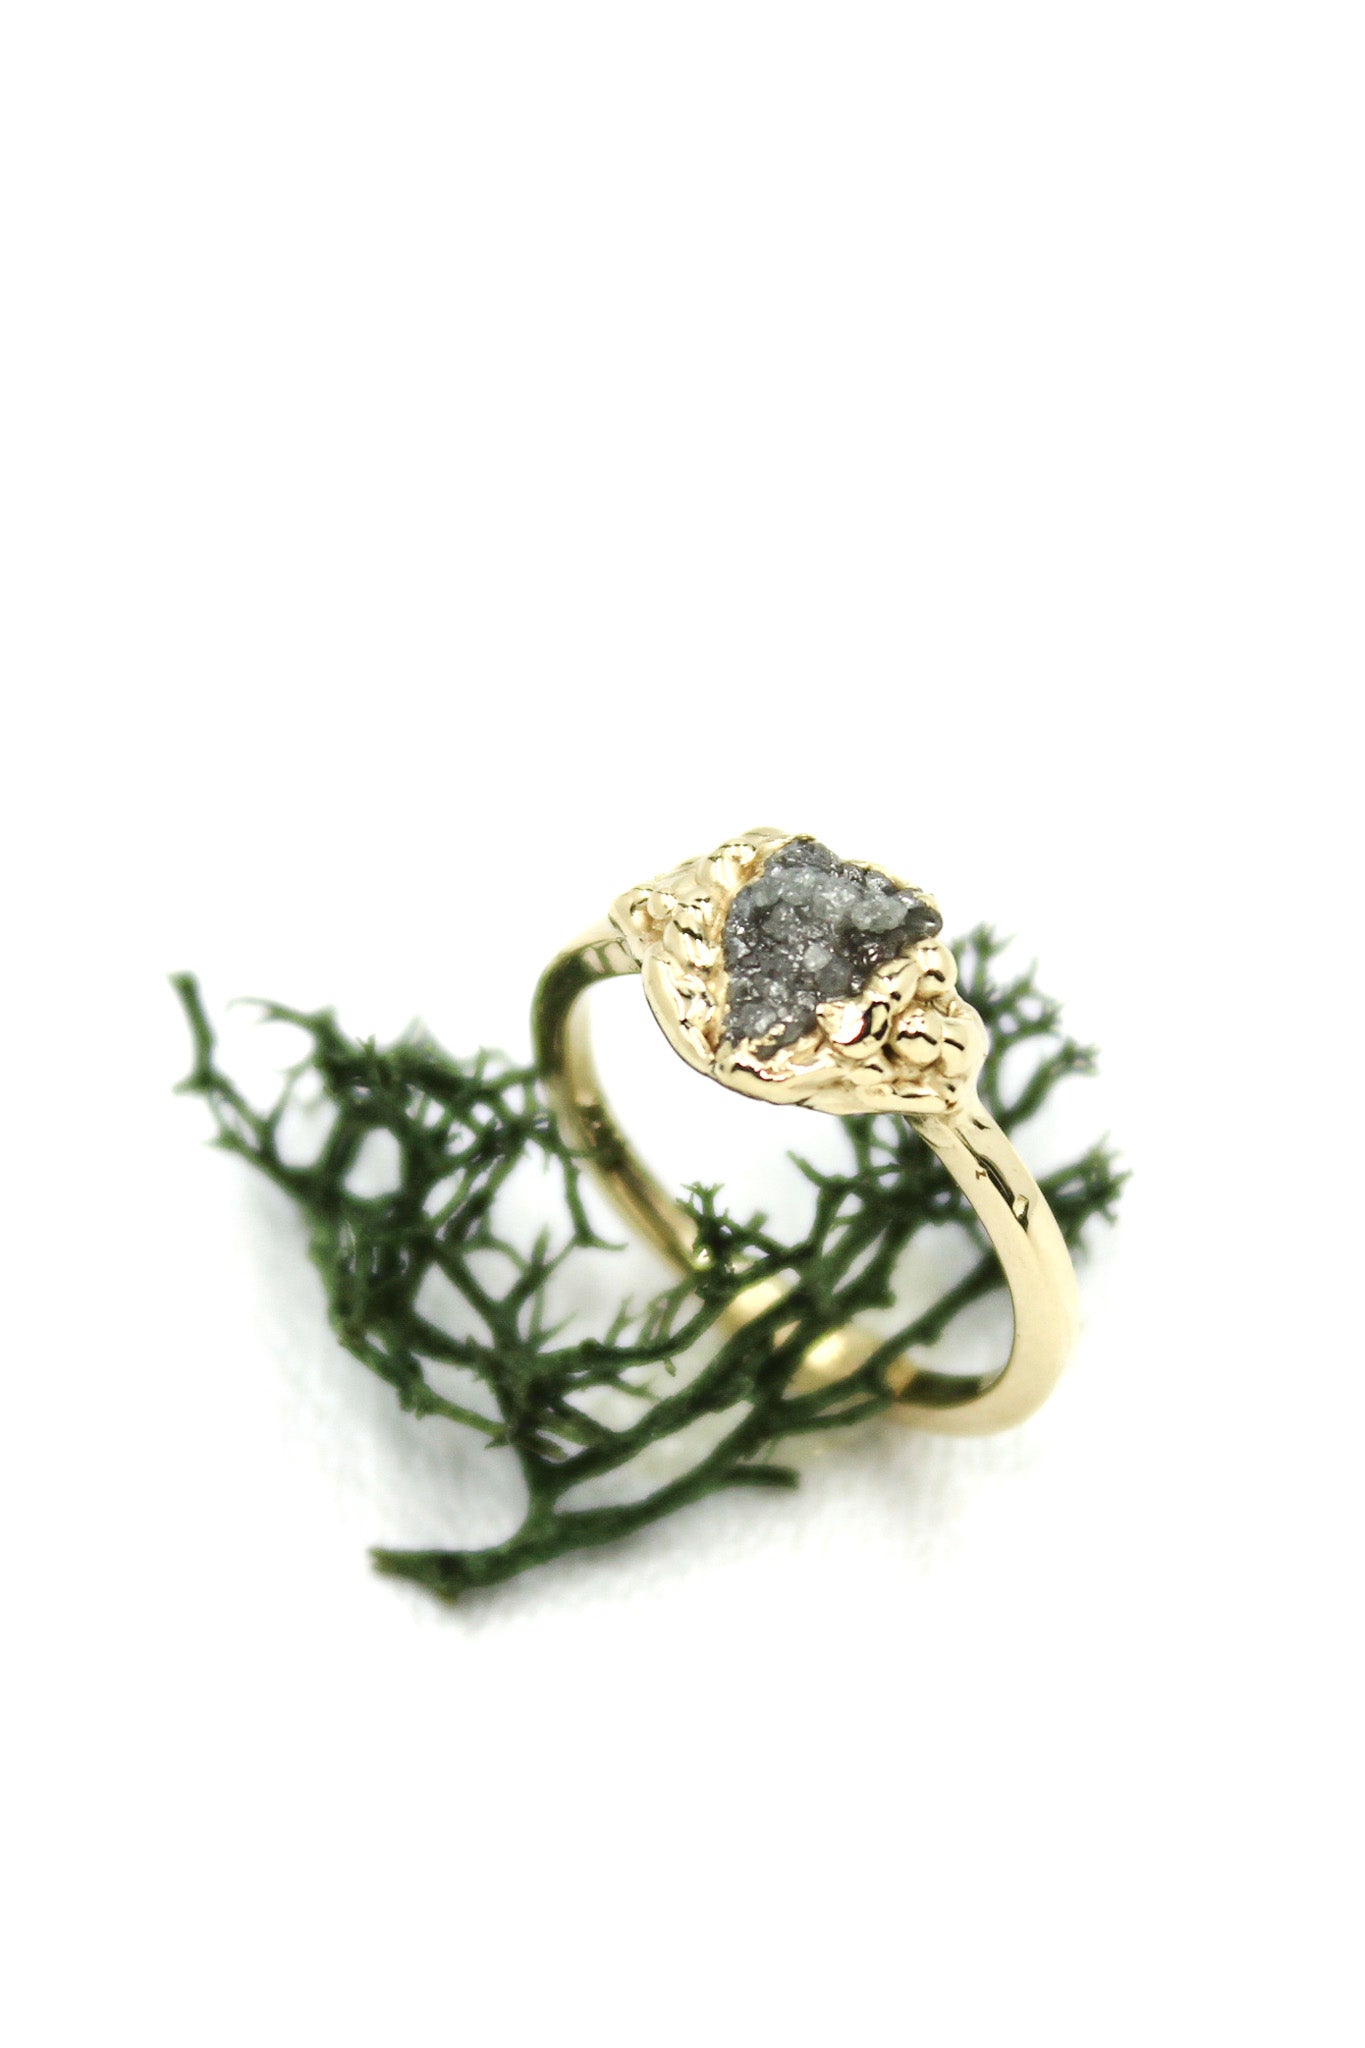 natural raw ethical Diamond crystal engagement ring 